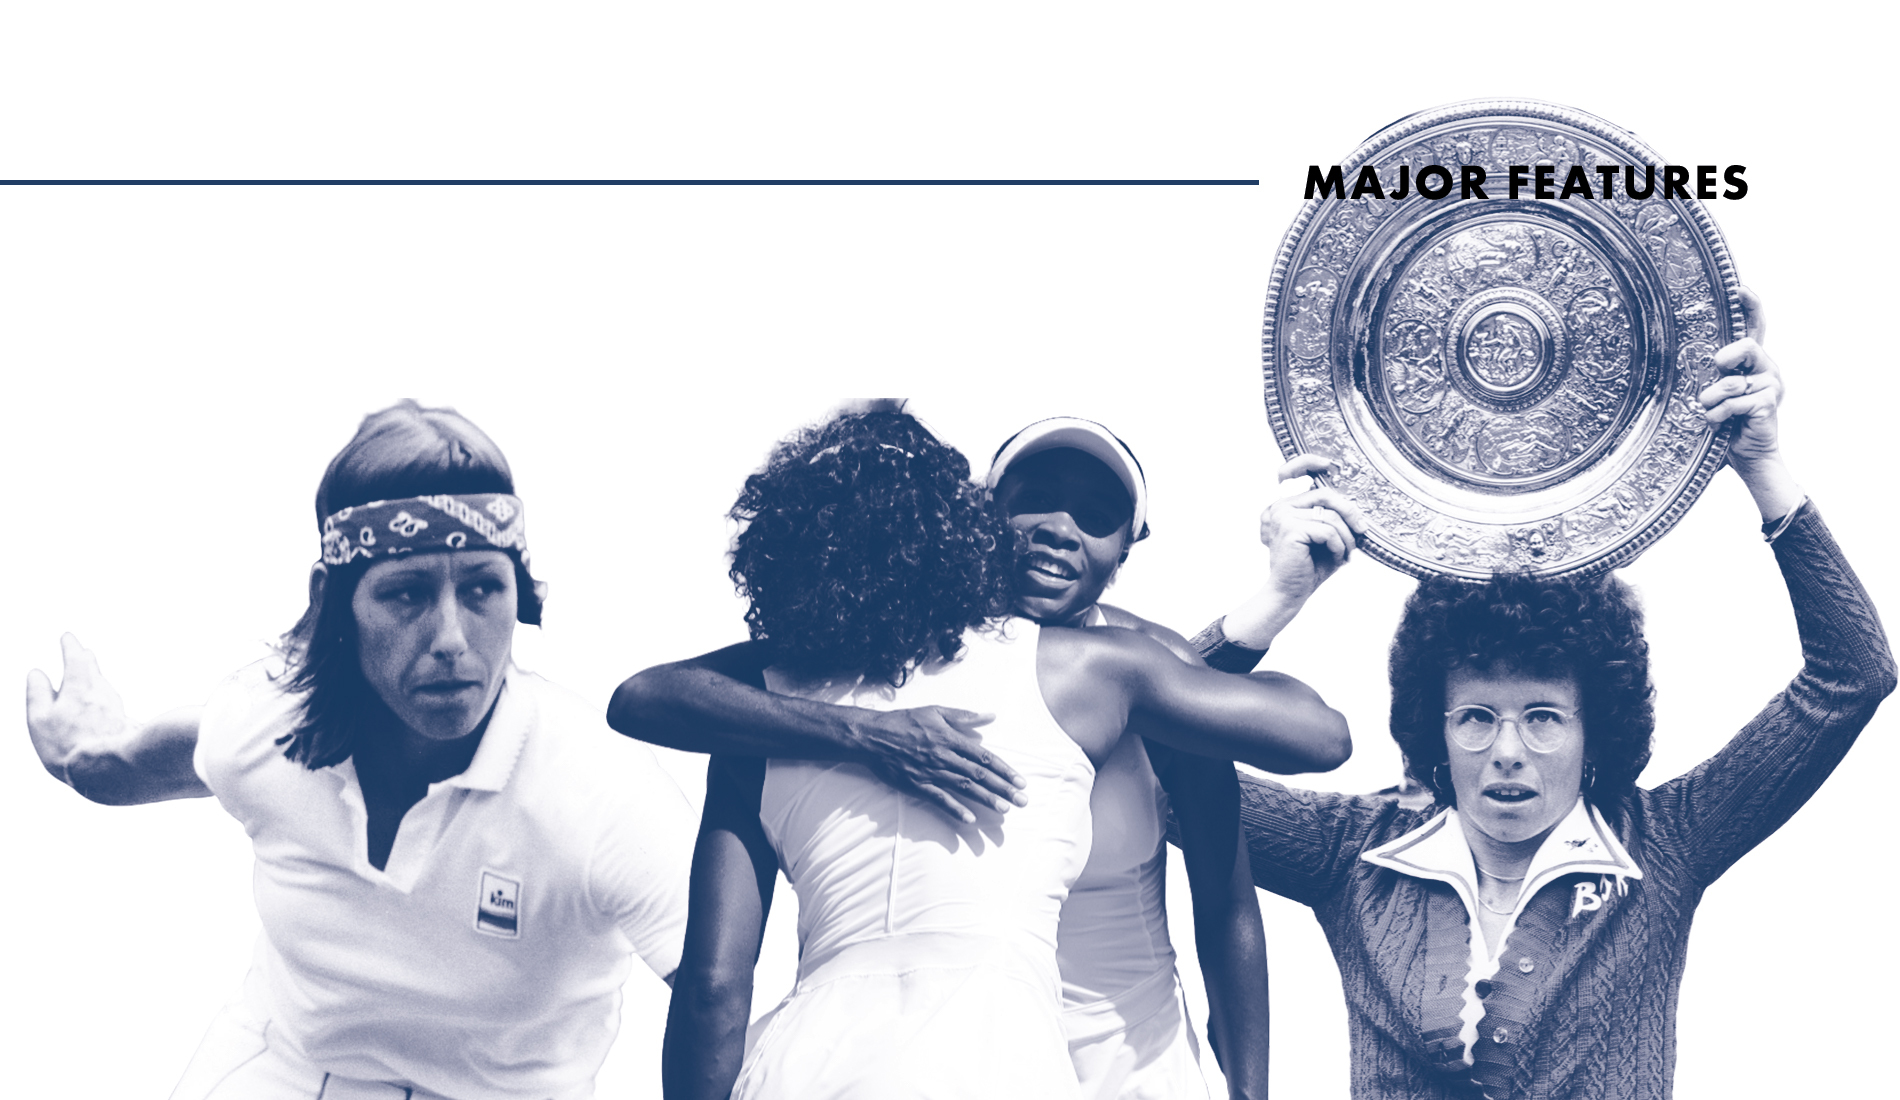 Let apart by men who did not belive in themselves, women had to fight to make their own tennis tour growing.